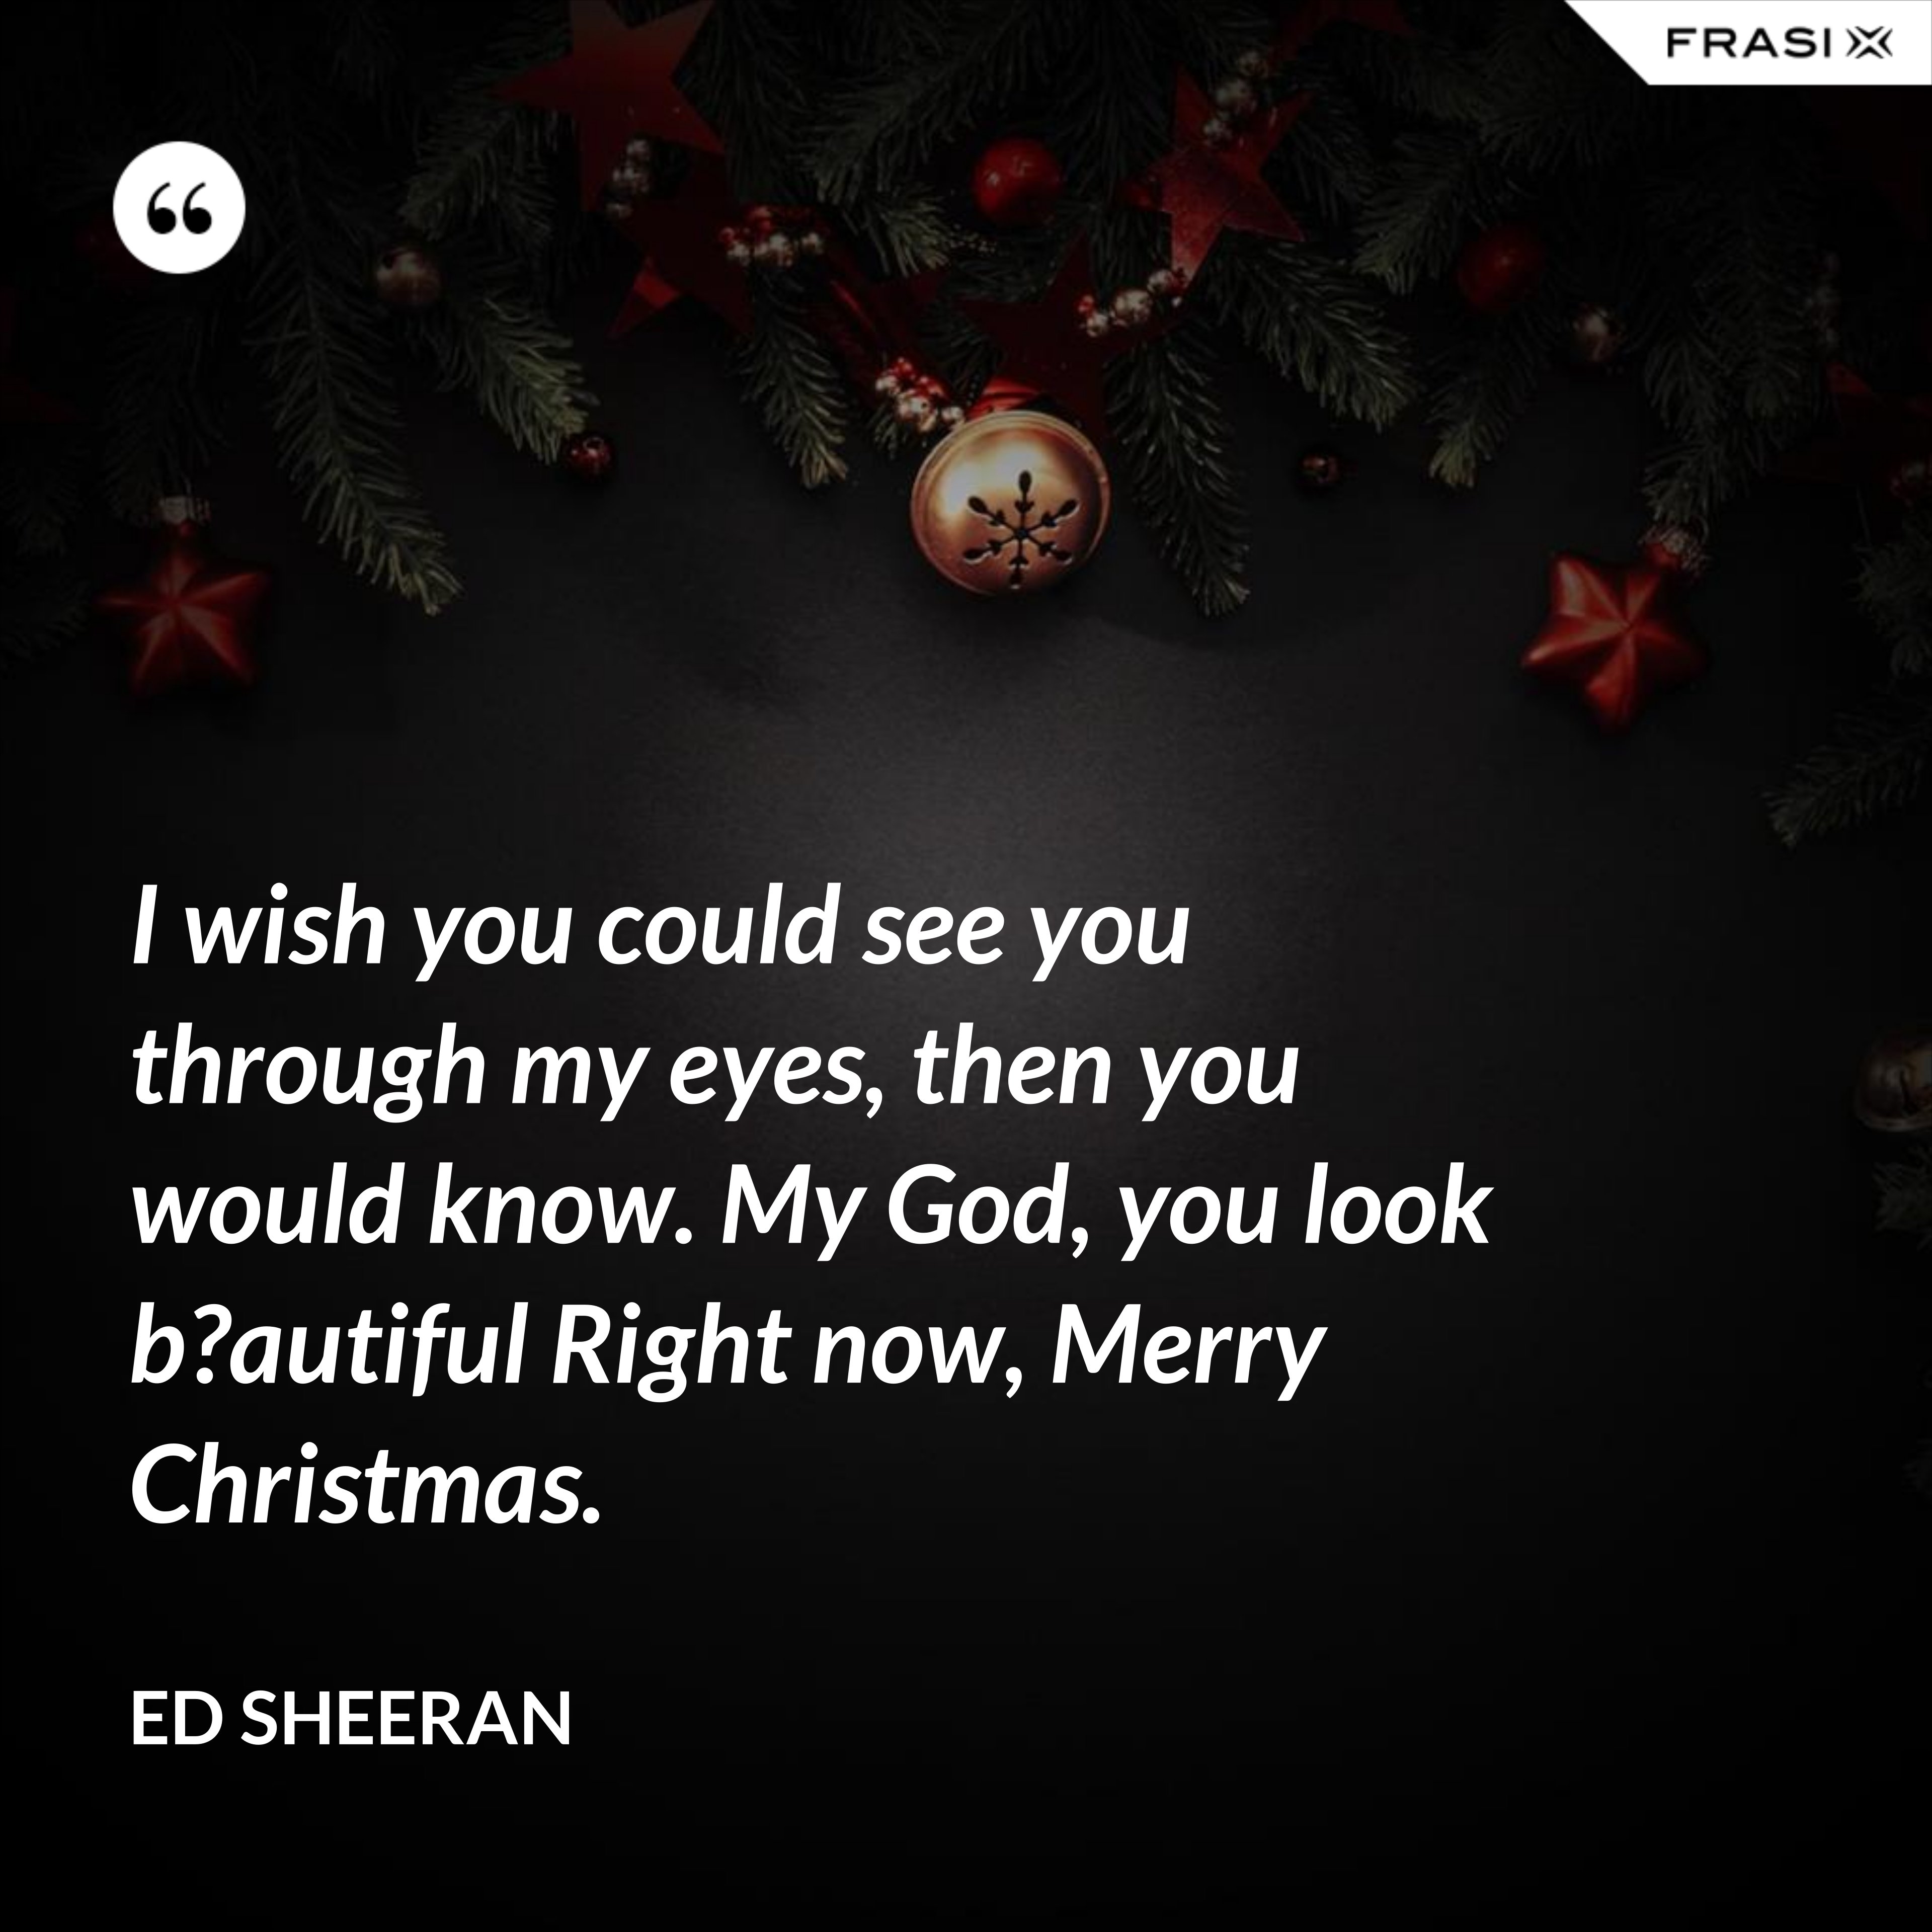 I wish you could see you through my eyes, then you would know. My God, you look b?autiful Right now, Merry Christmas. - Ed Sheeran